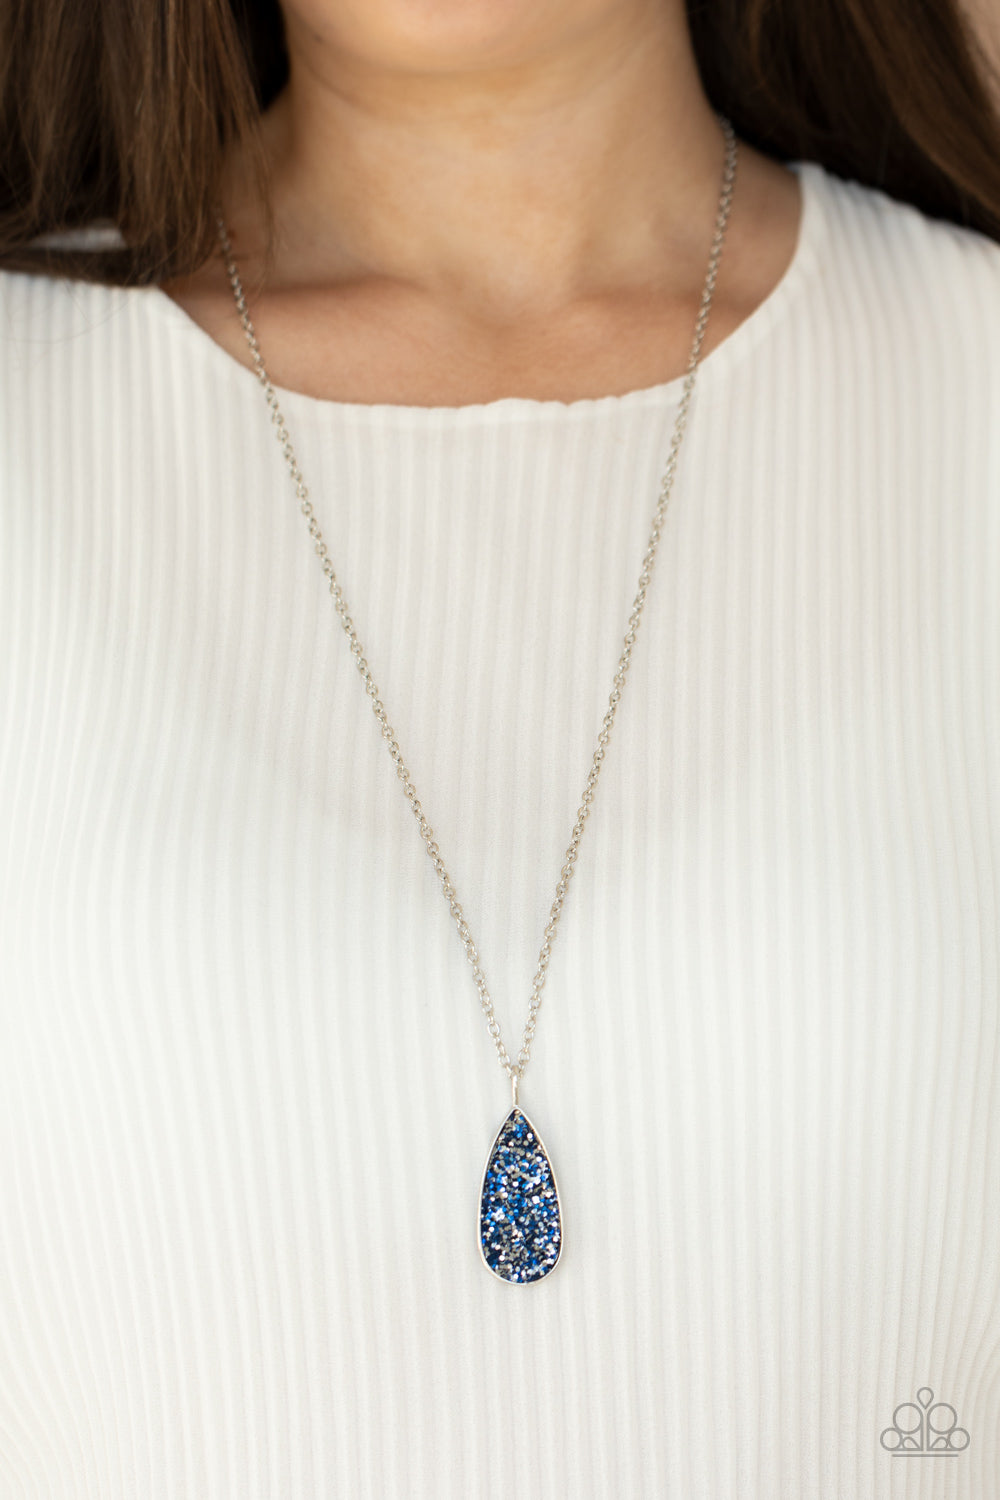 Daily Dose of Sparkle - Blue necklace